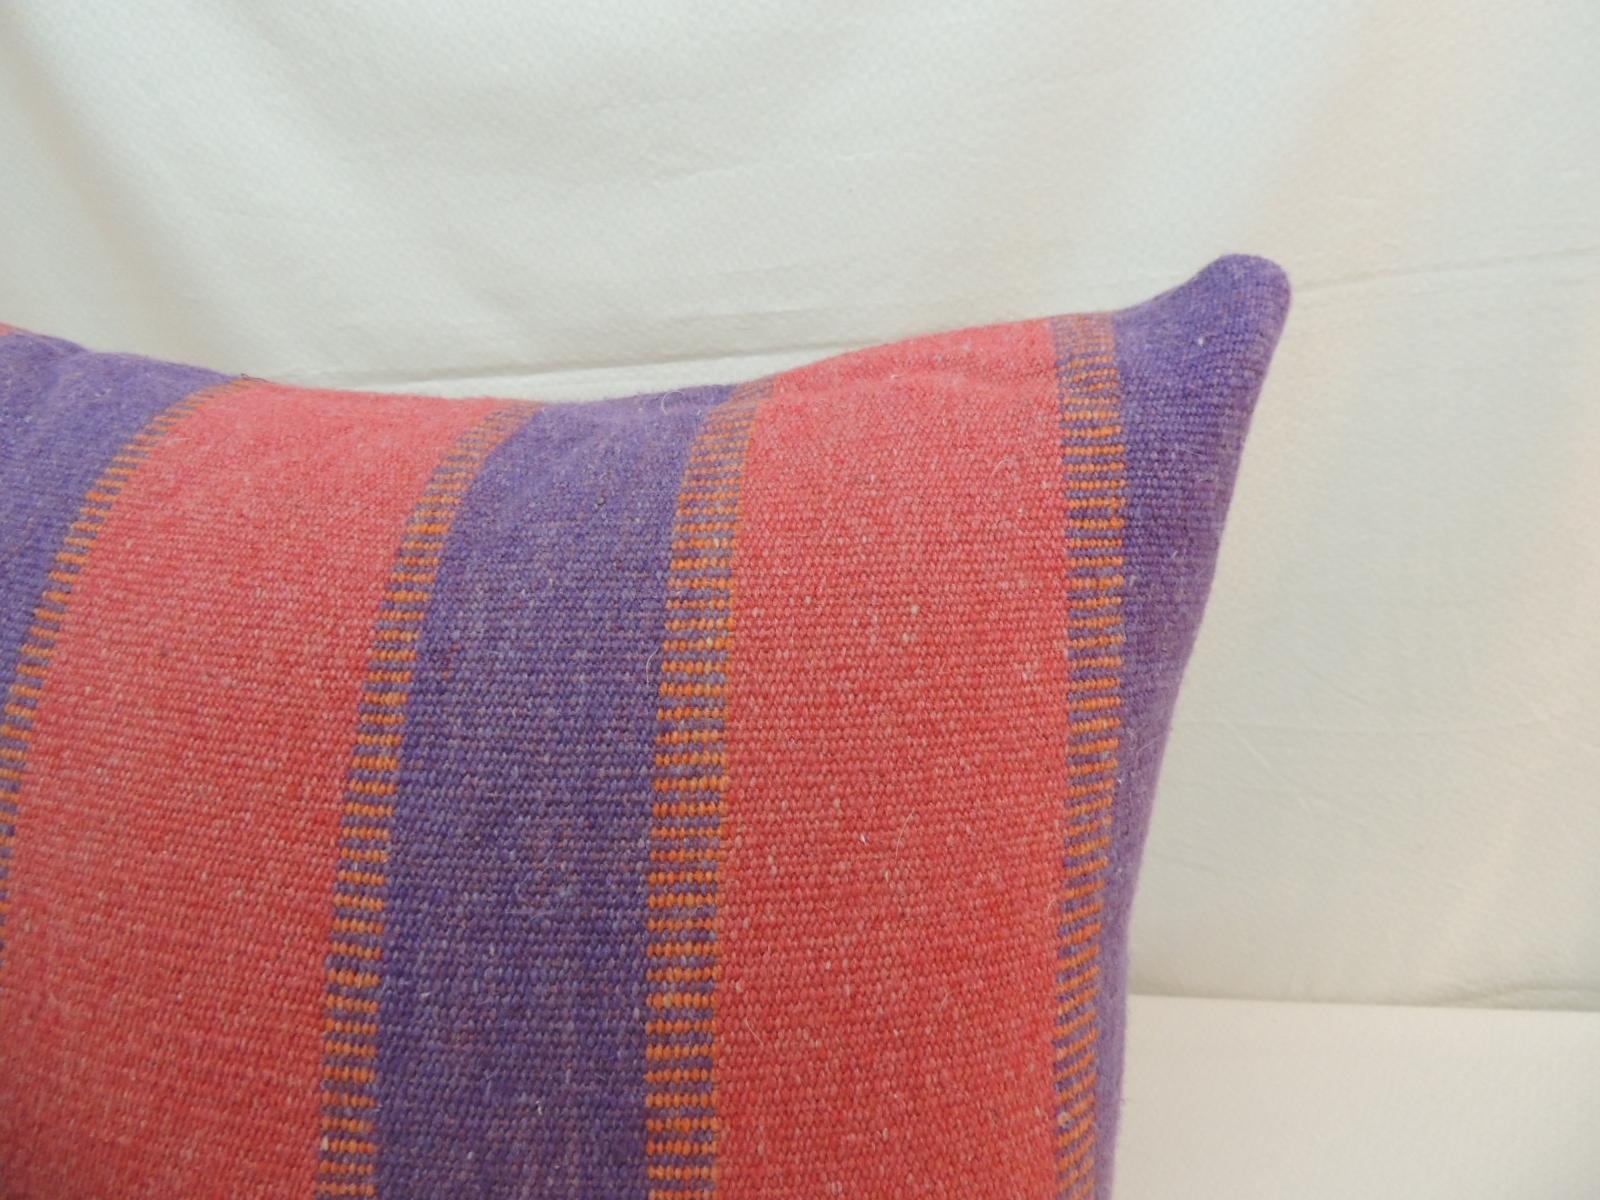 Large Floor pillow in blue and red Woven Stripes.
Doubled-Sided with same textile.
Decorative pillow handcrafted and designed in the USA. 
Closure by stitch (no zipper closure) with custom-made pillow insert.
Size: 21 x 21 x 6
Offered By Antique